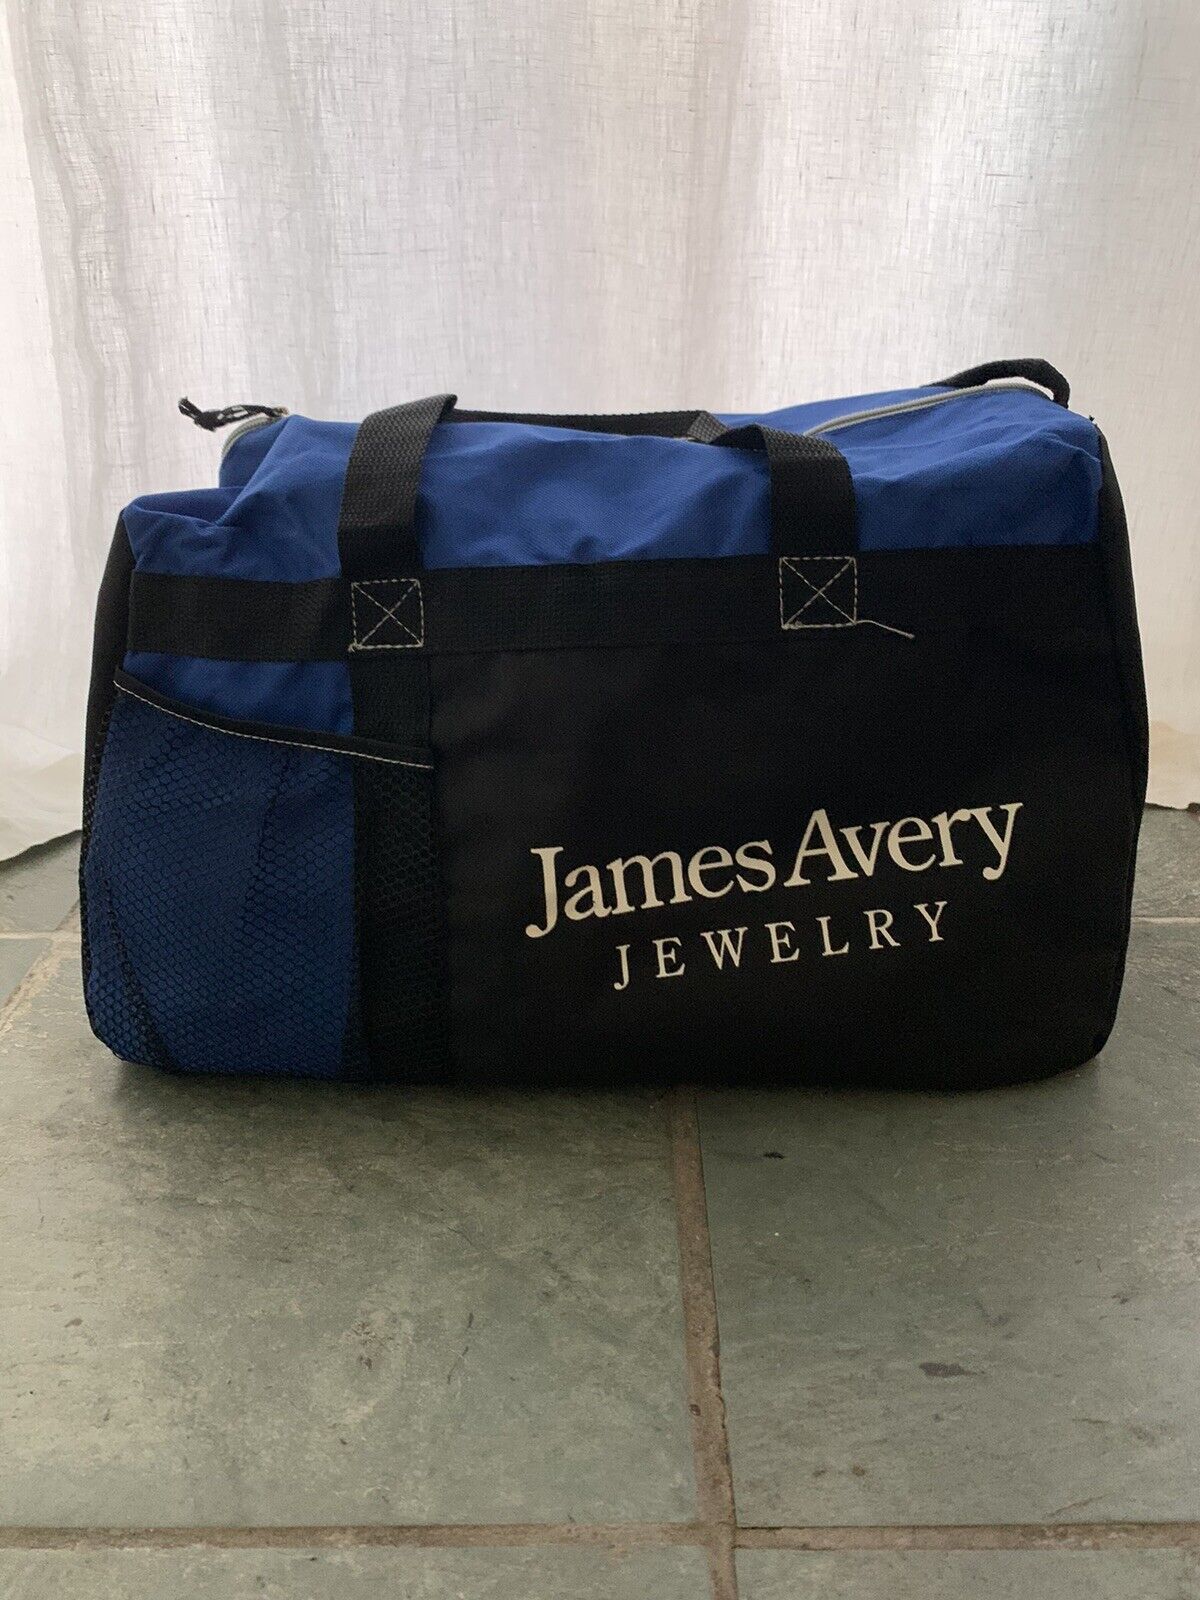 James Avery Jewelry Promotional Duffle Gym Bag Accessories Memorabilia Tote